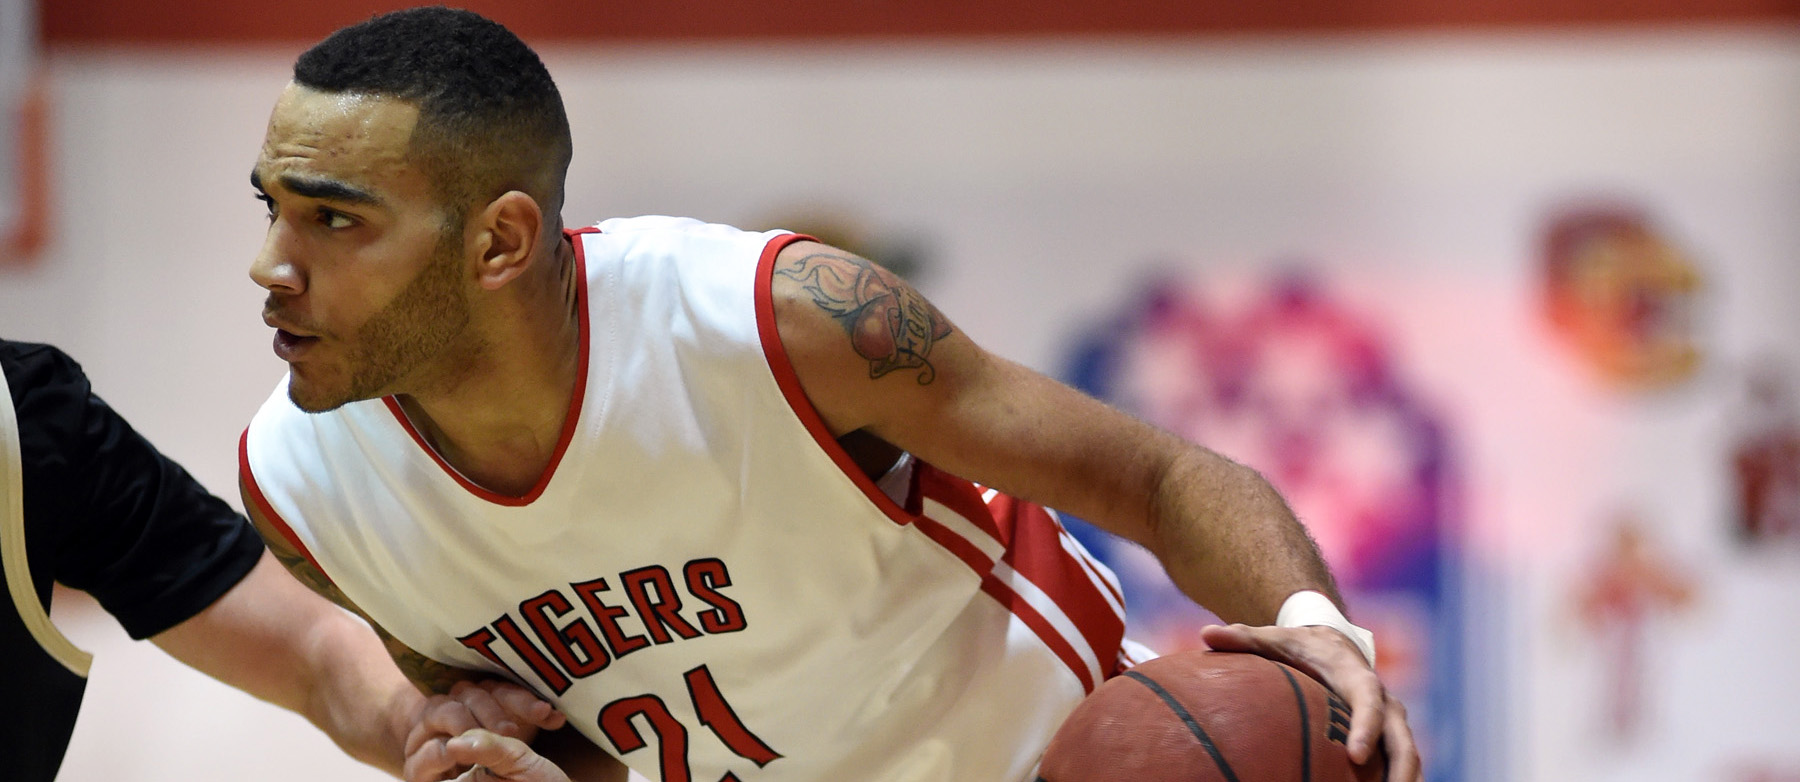 Jaelin Williams netted 15 points in Saturday night's NCAC matchup. File Photo| Nick Falzerano.